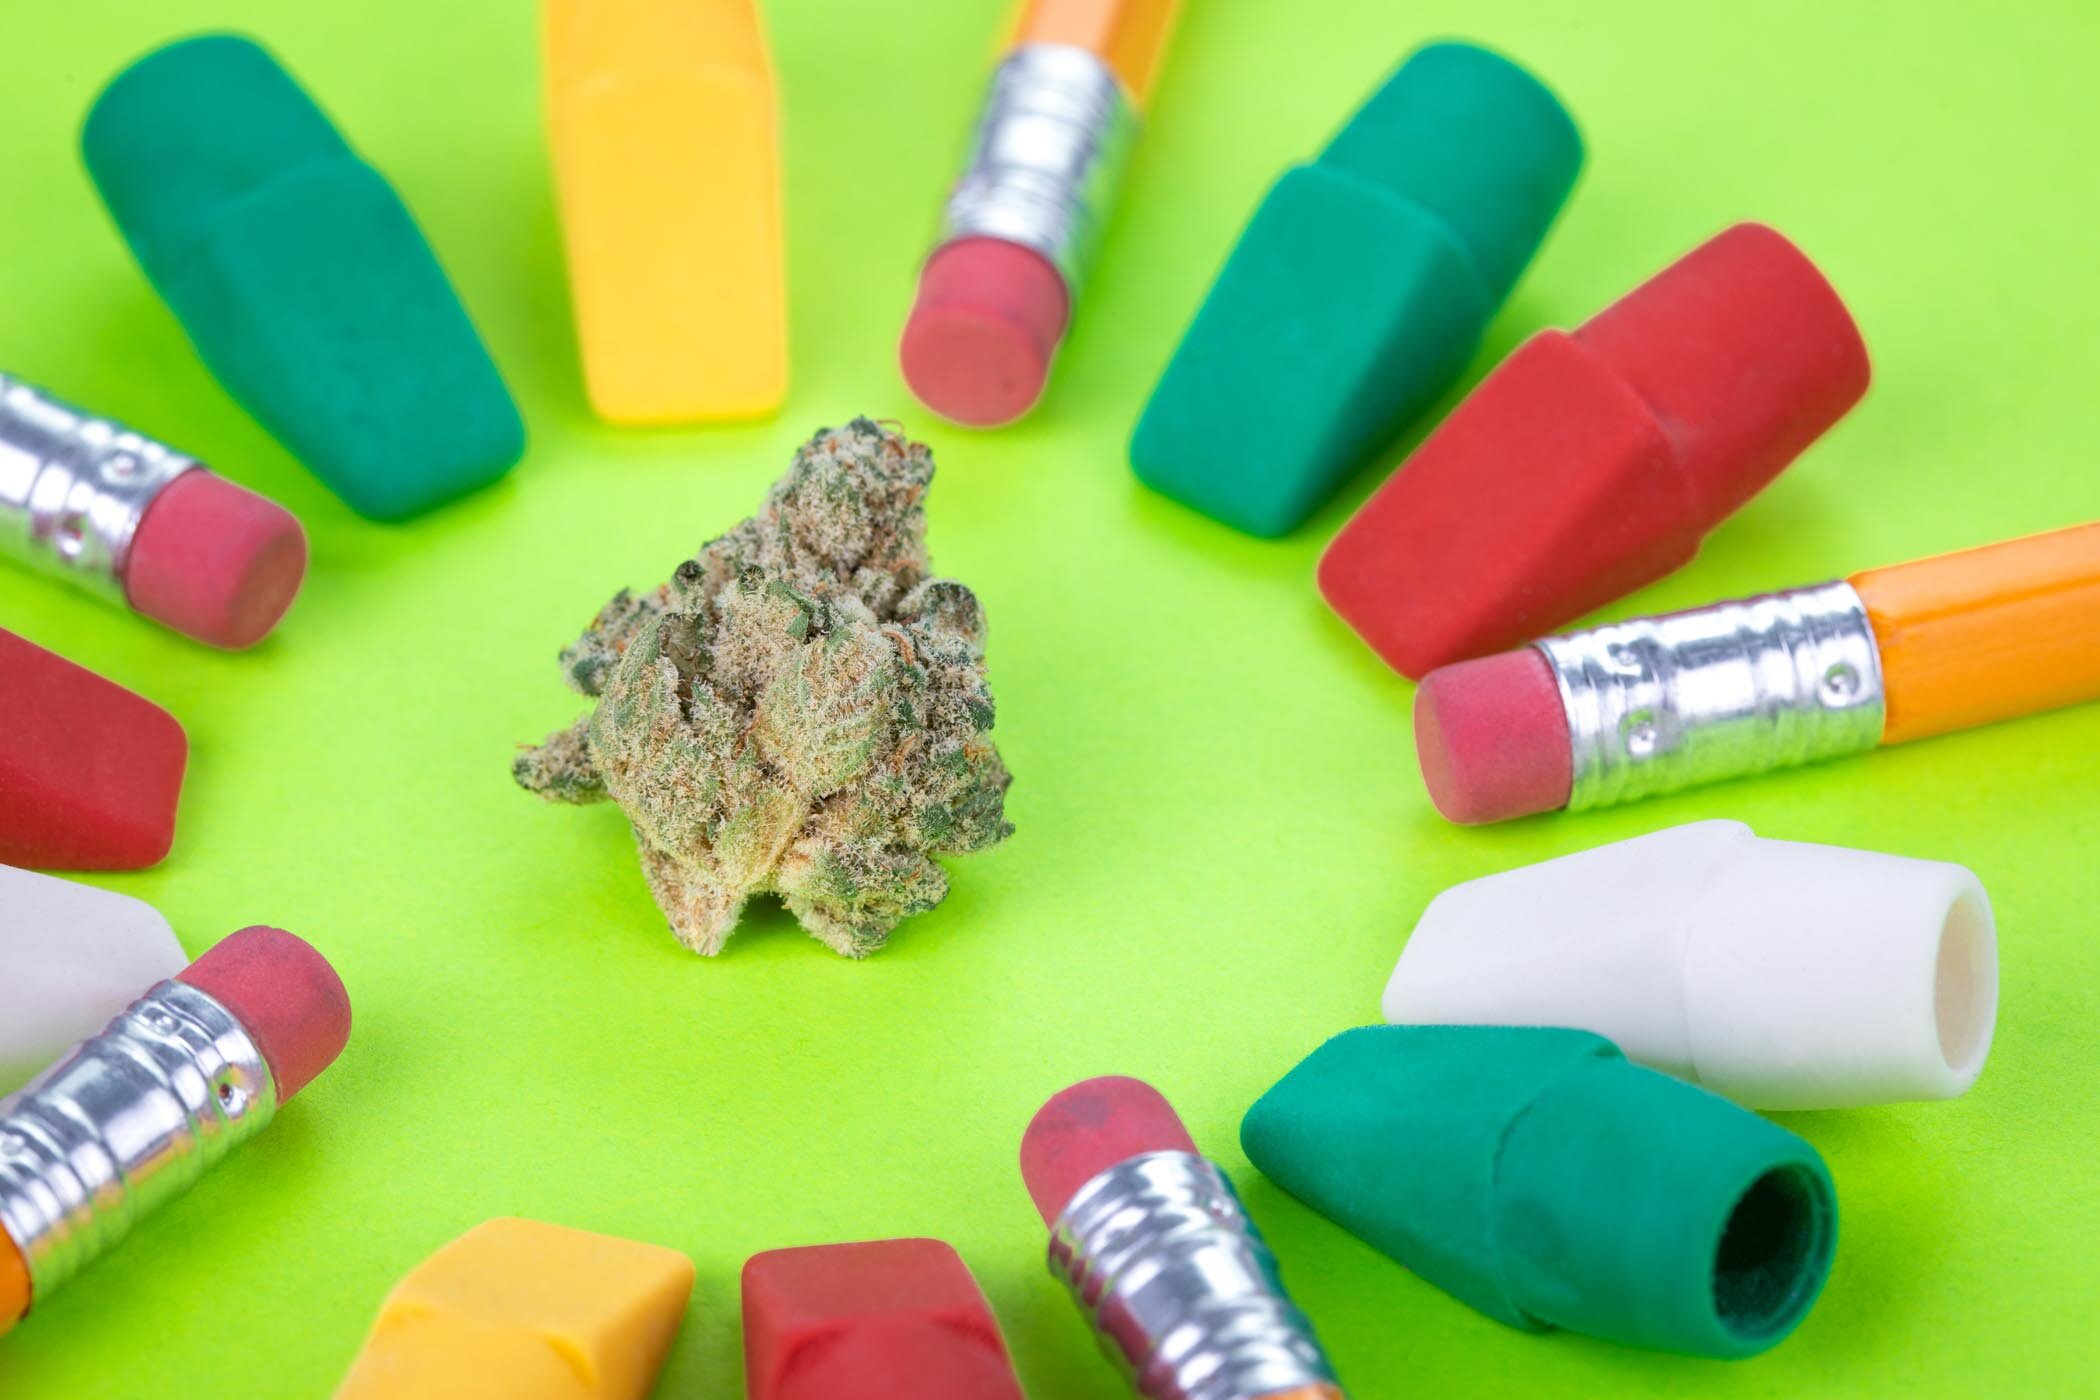 about potography - contest survey page 1 - cannabis buds surrounded by pencils and erasers on green background landscape